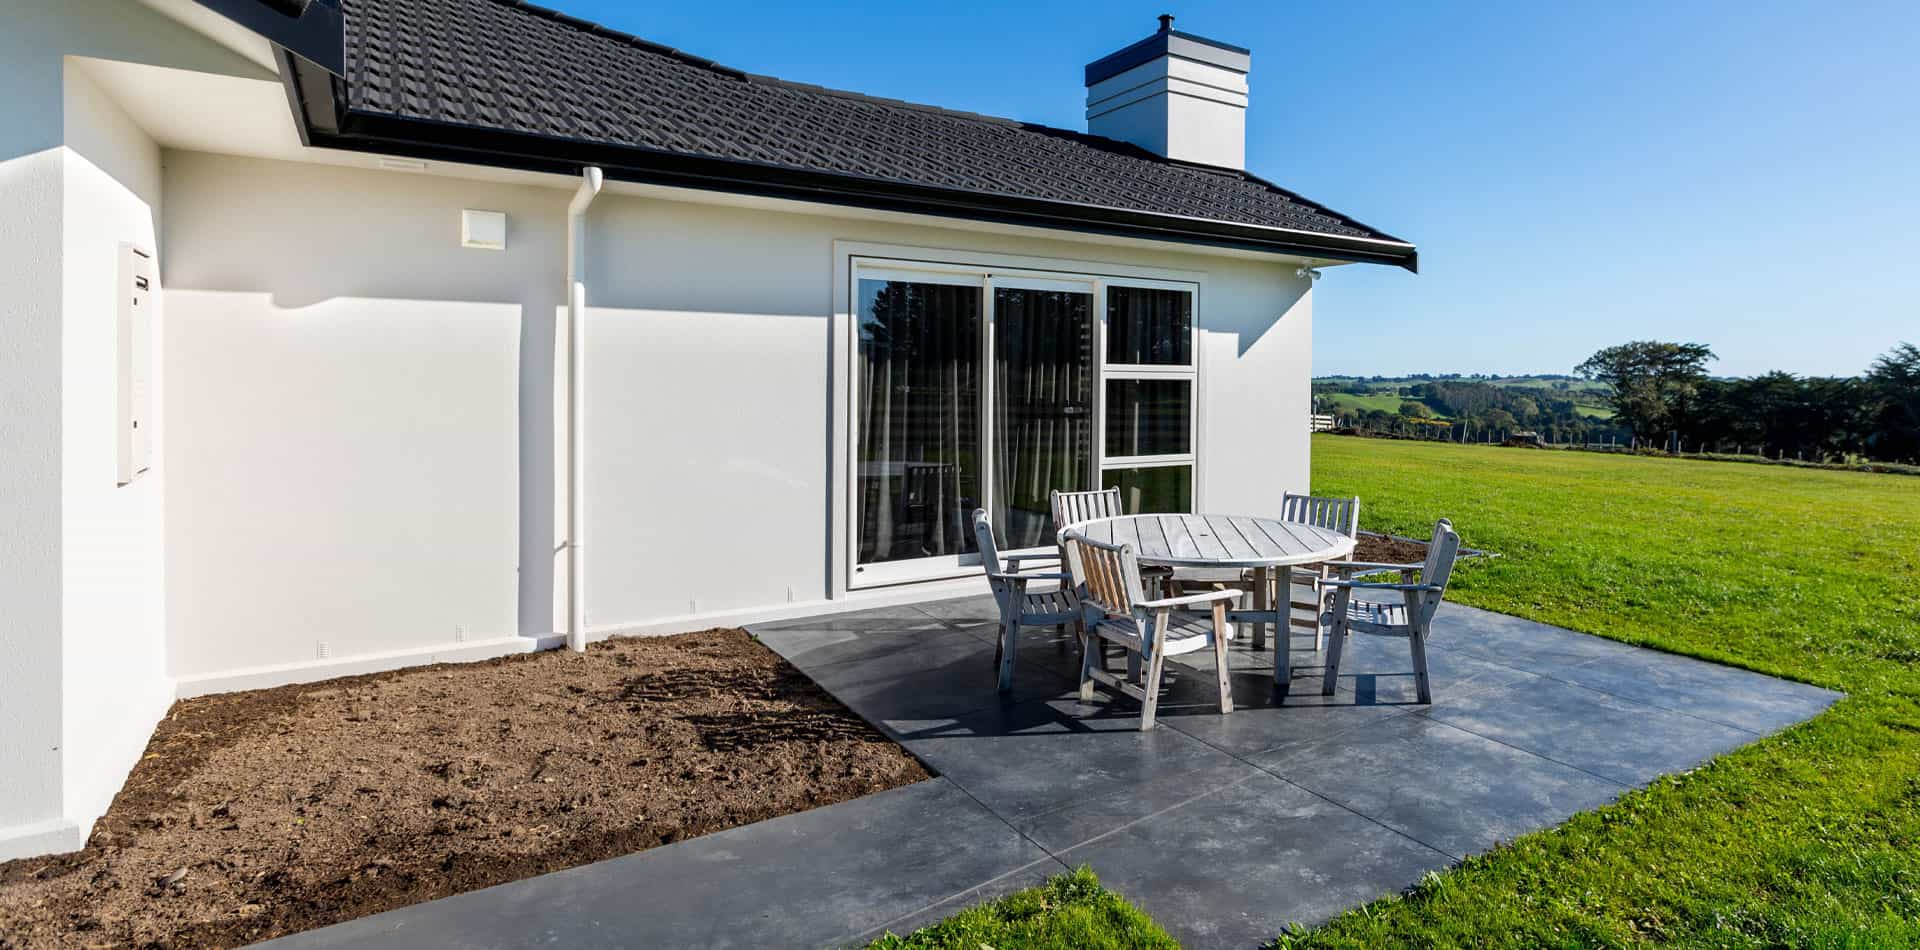 Fowler-Homes-design-and-build-new-zealand-wide-previous-builds-Manawatu-Meads-3